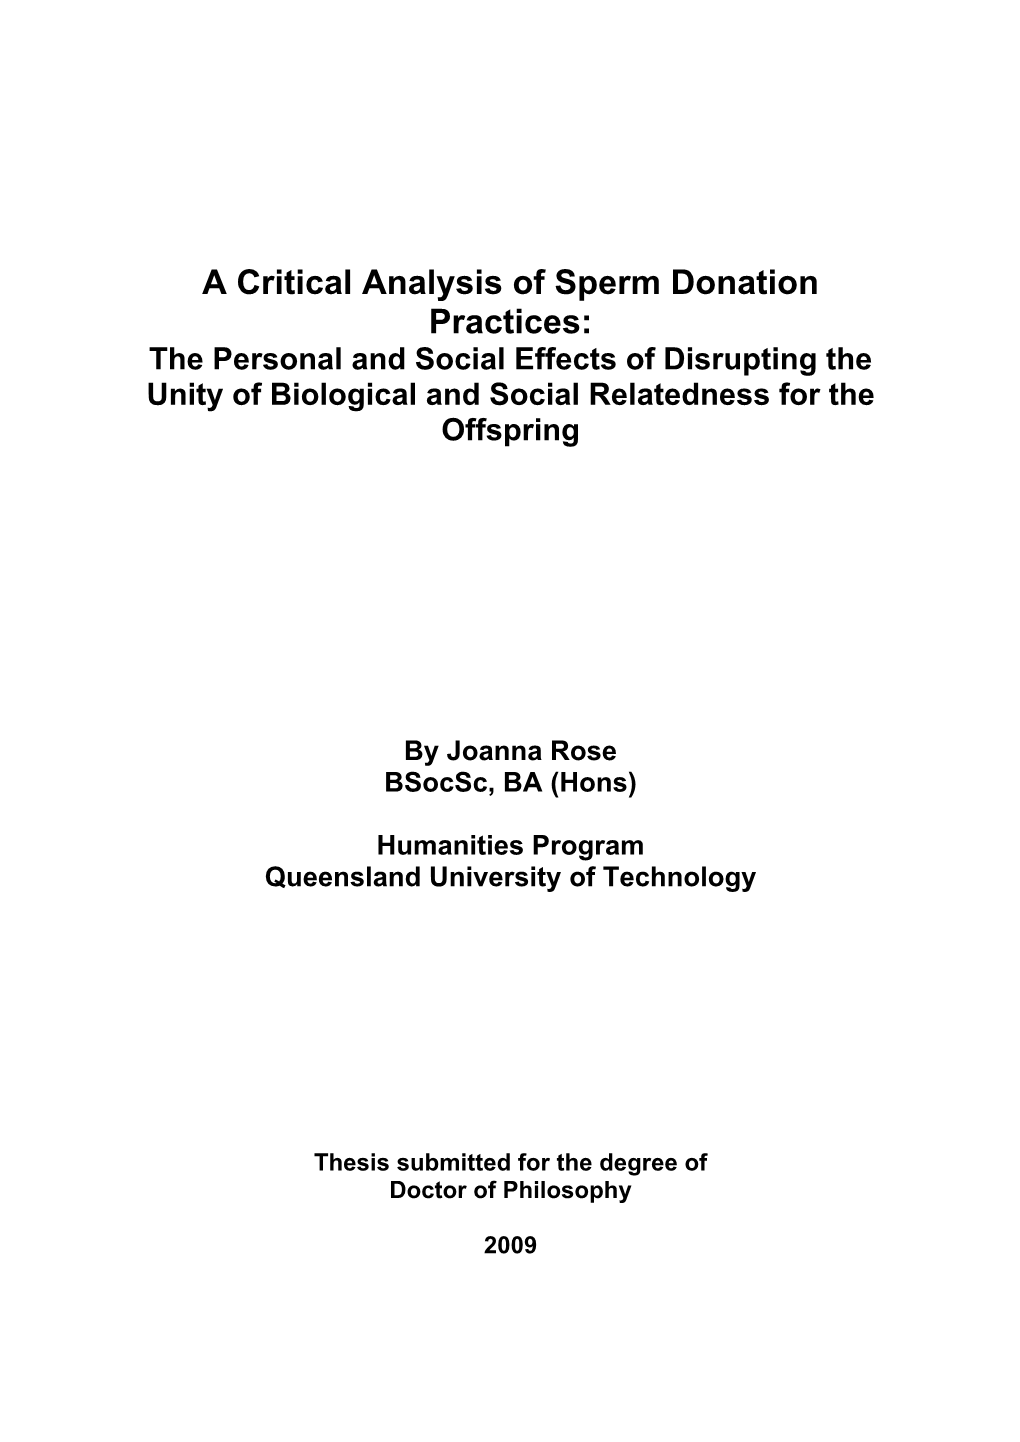 A Critical Analysis of Sperm Donation Practices: the Personal and Social Effects of Disrupting the Unity of Biological and Social Relatedness for the Offspring